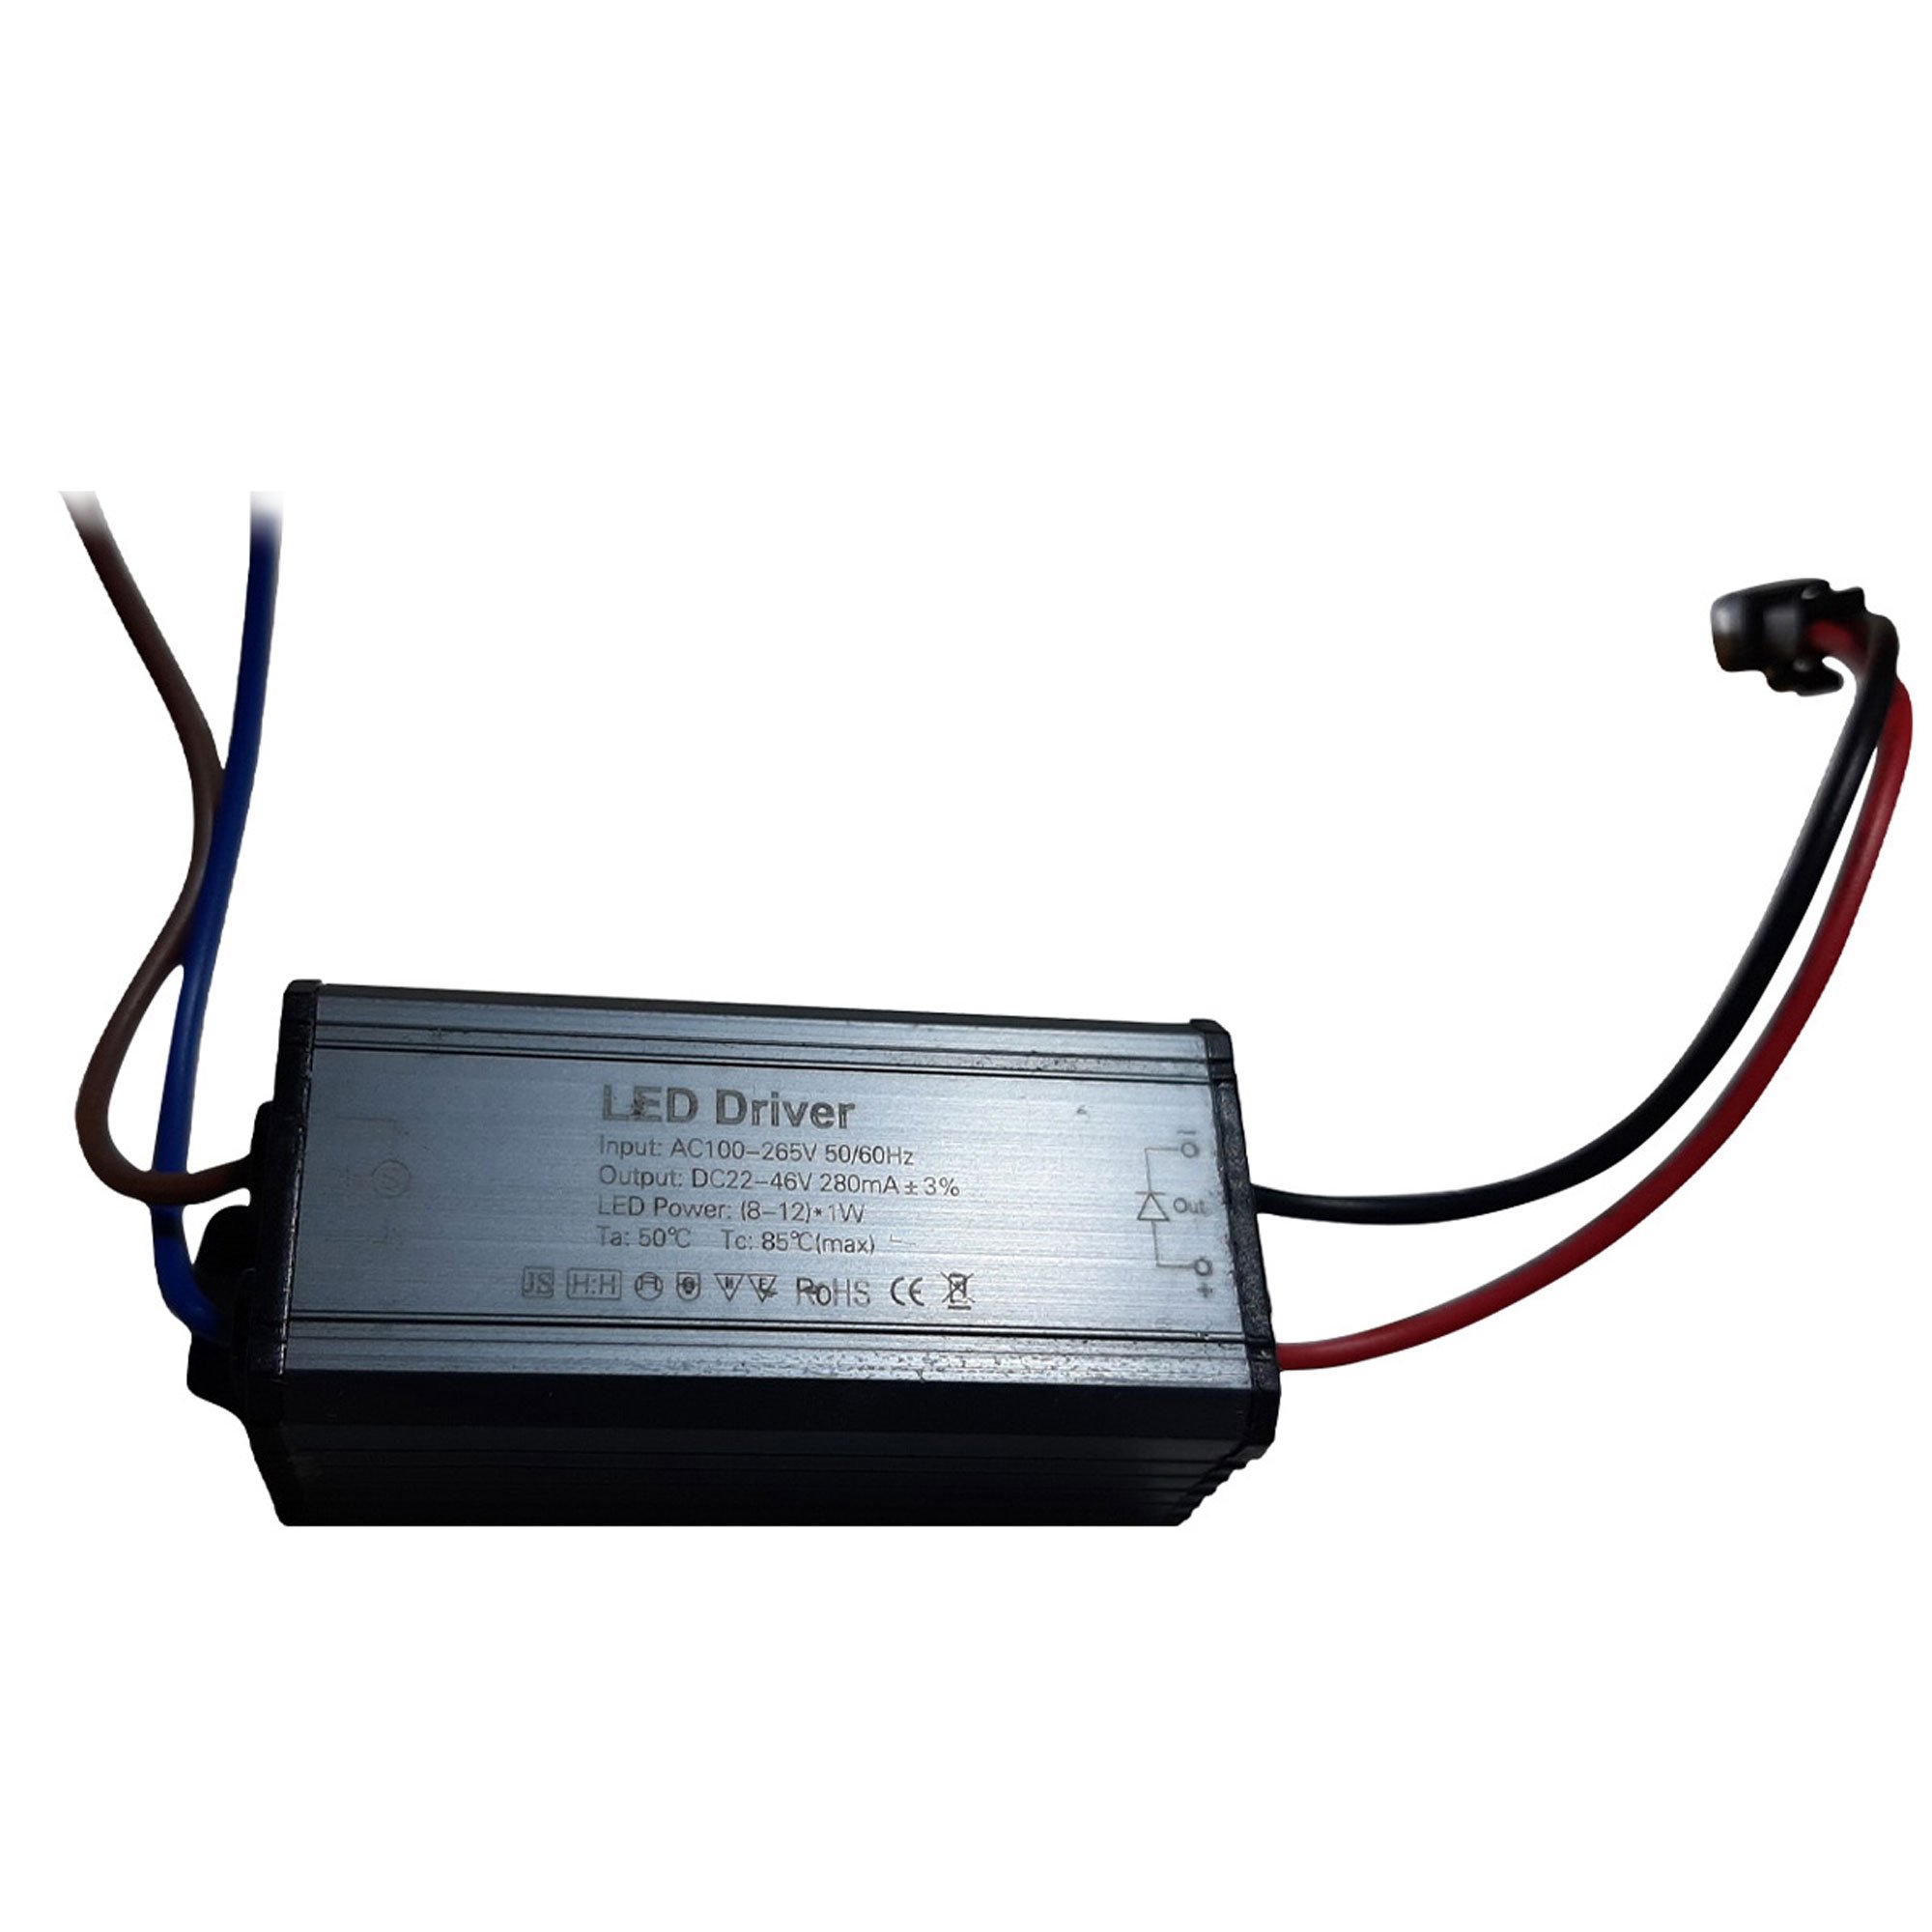 LED Driver Supply Transformer 240V Constant Current use with MR16 eBay